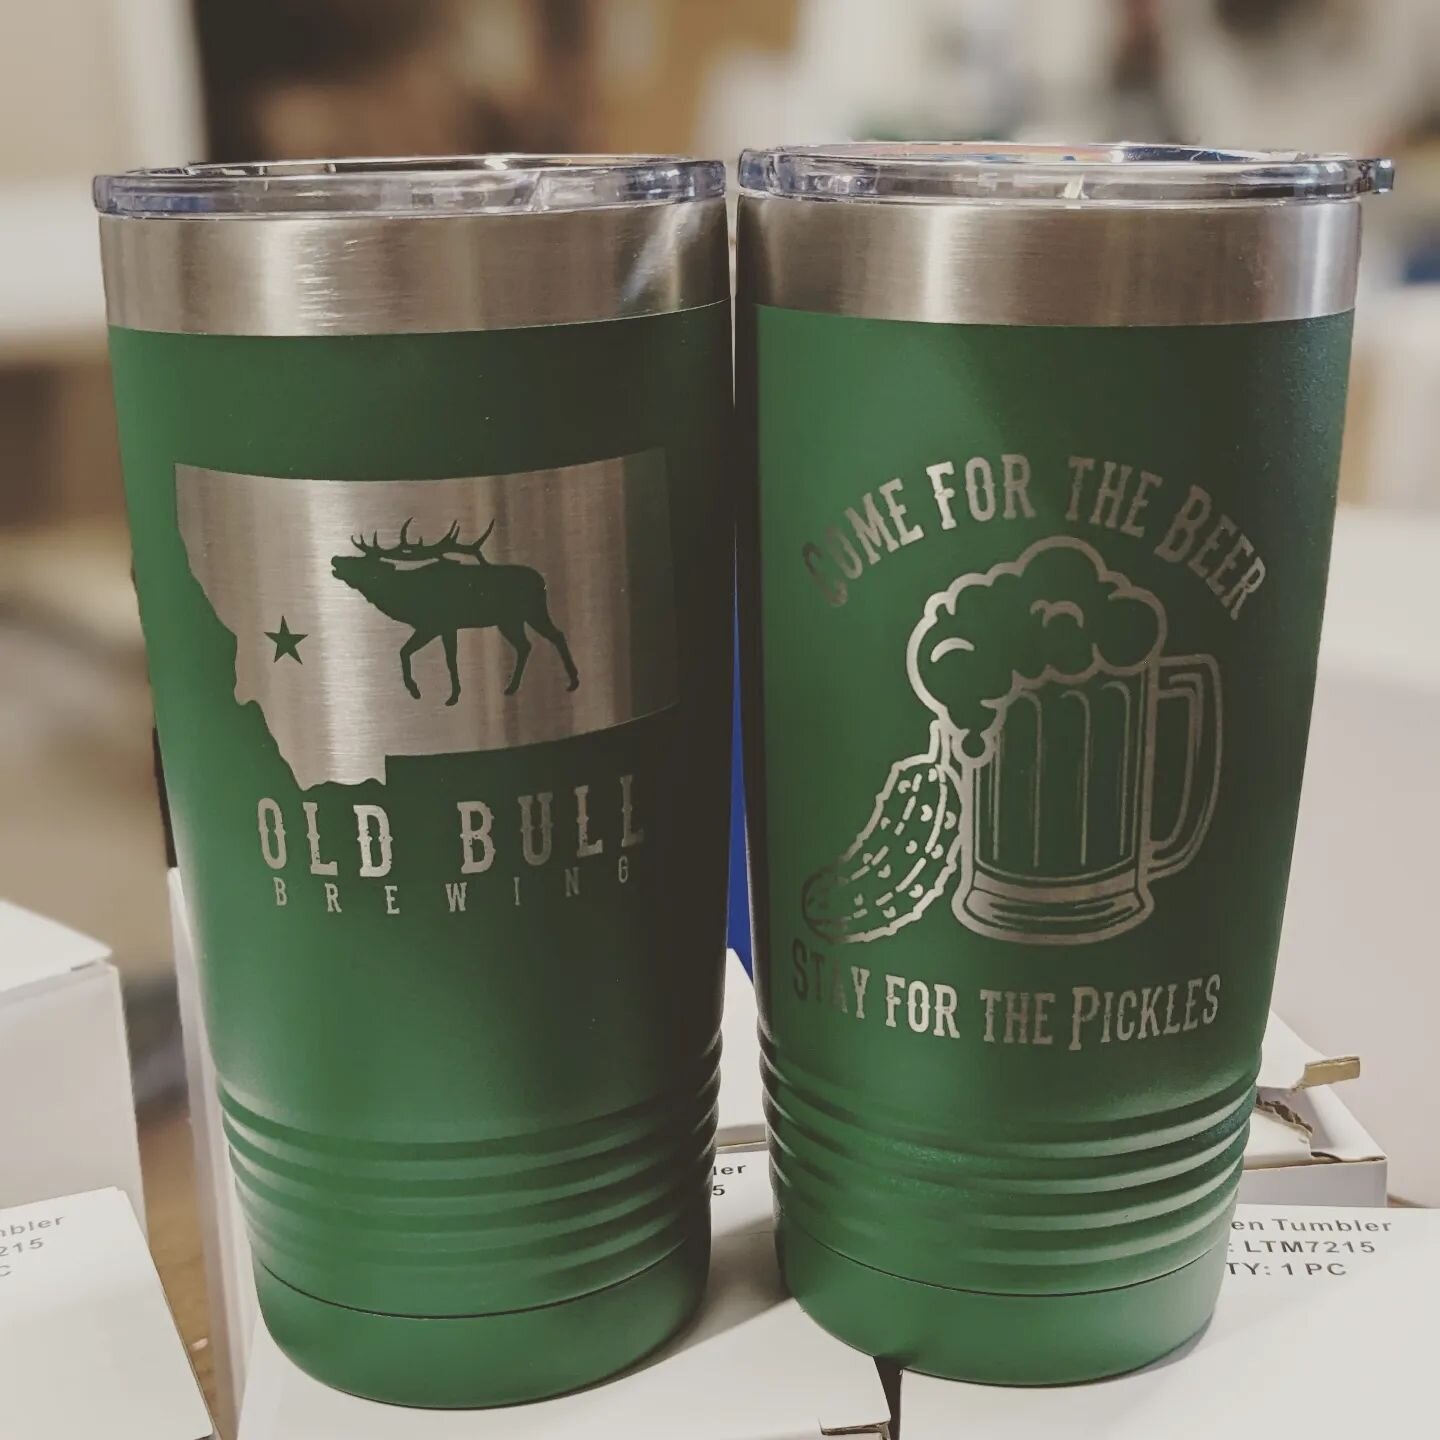 Have you had a pickle flight from @oldbullbrewing yet? 

New tumbler goodies will be available in their taproom soon, get yours before they're gone for good, and grab a pickle flight with your beer while you're there!
&middot;
&middot;
&middot;
#lase